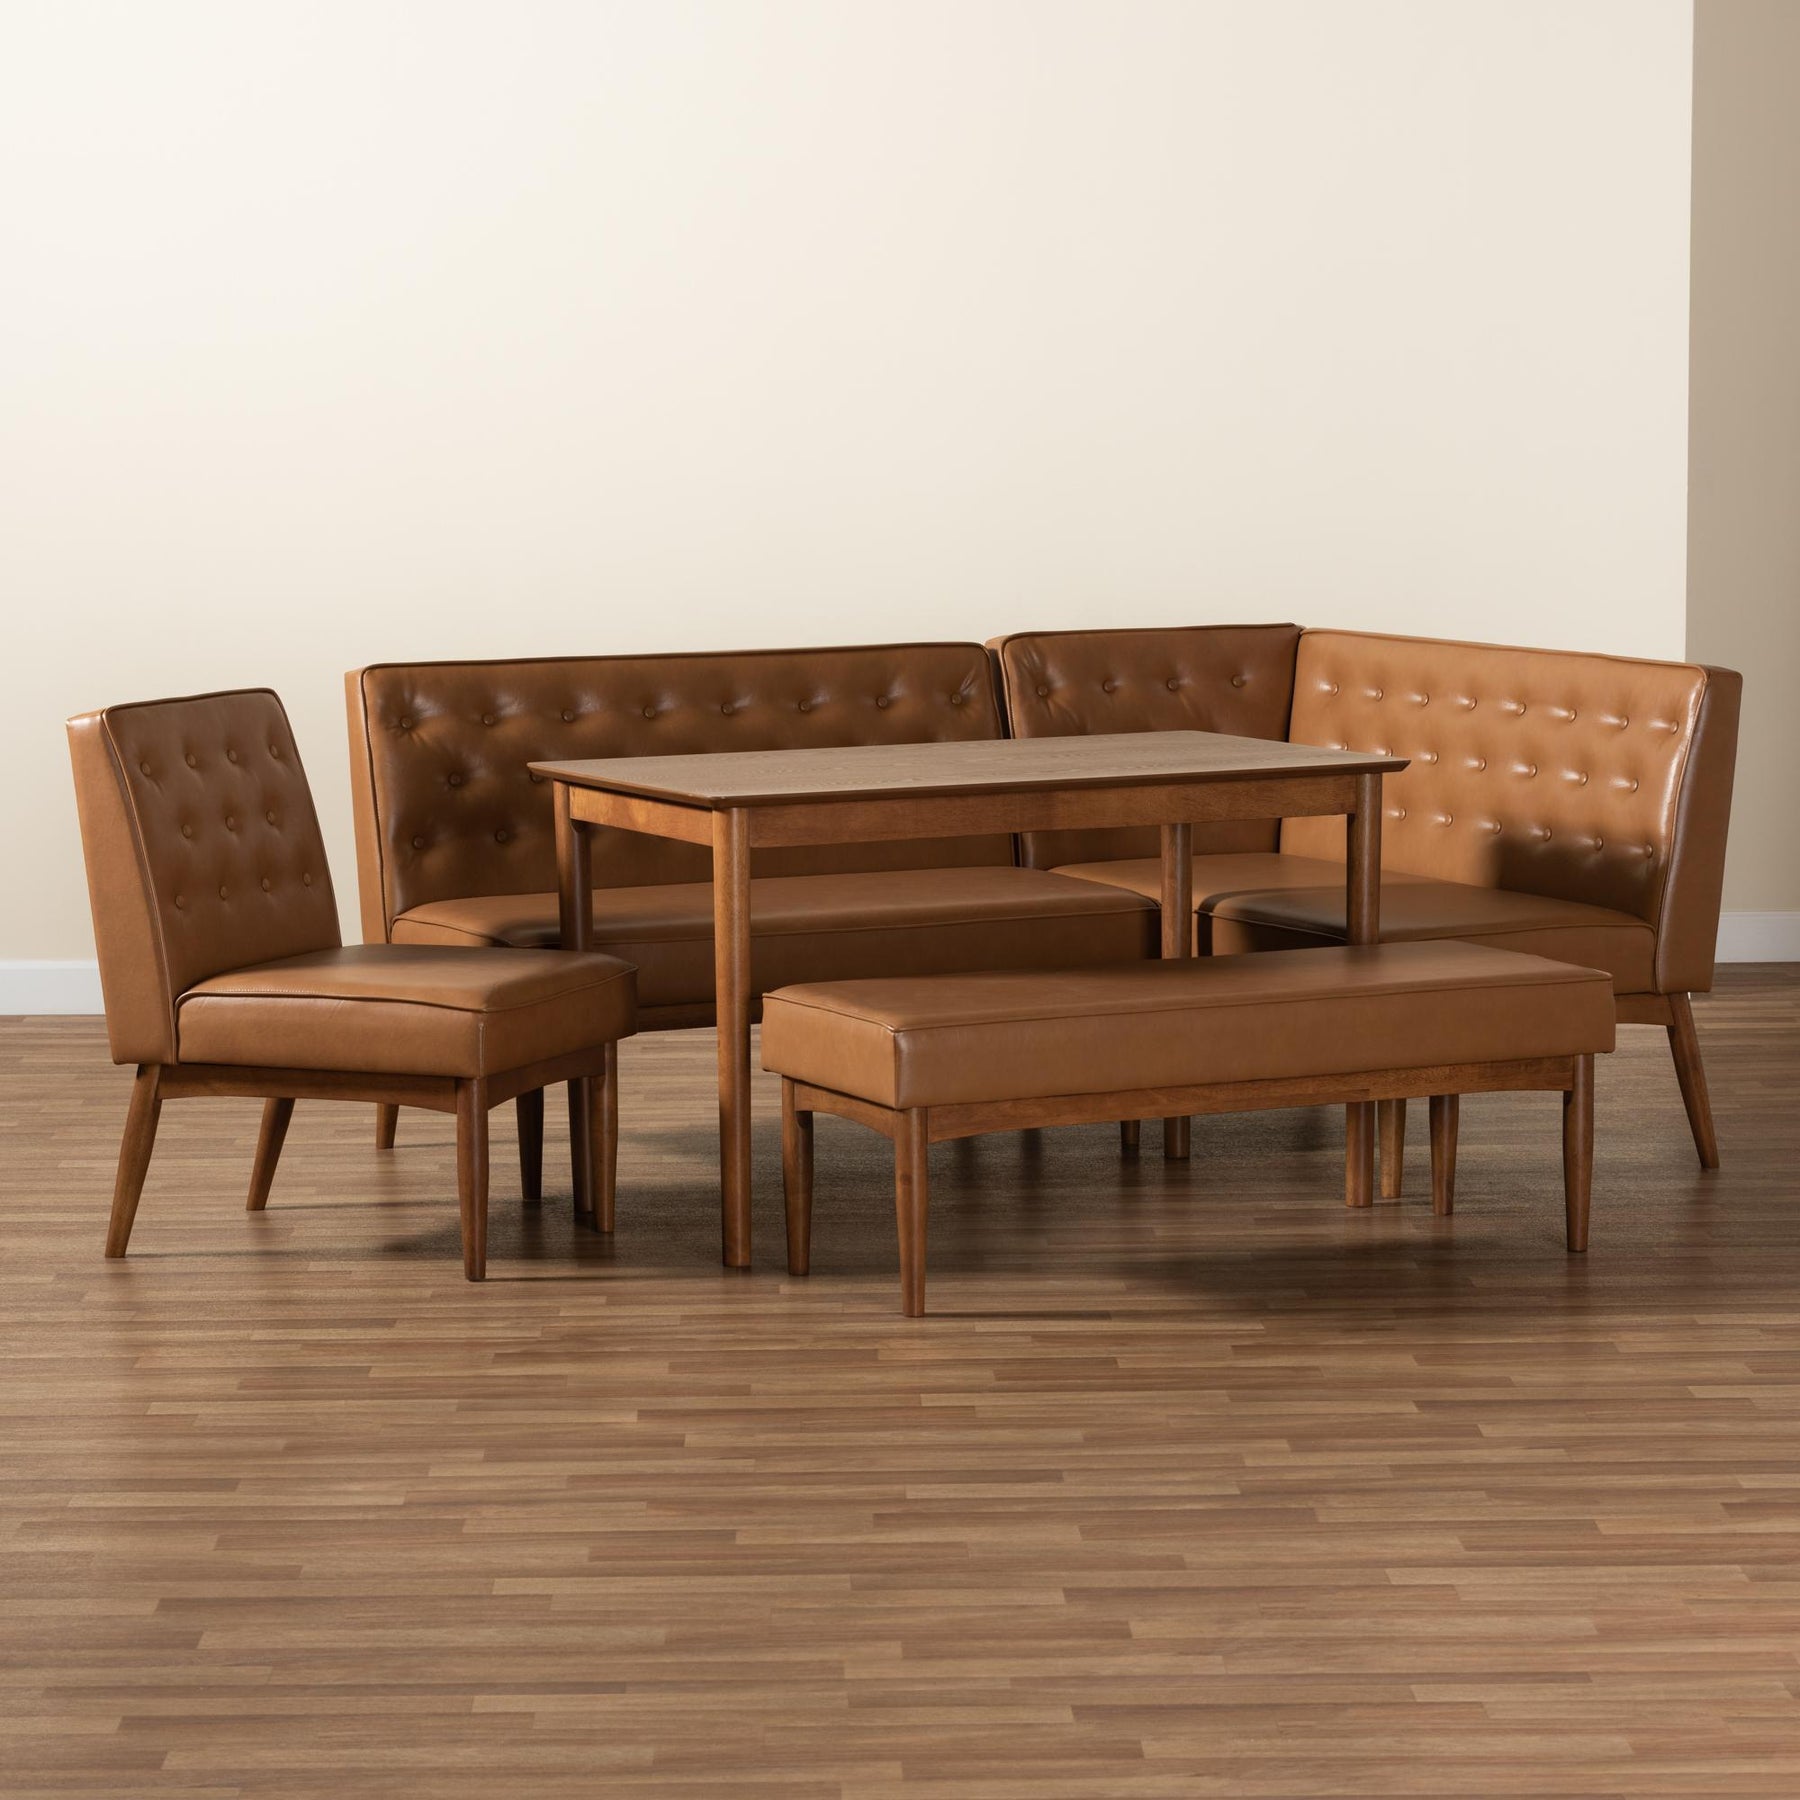 Baxton Studio Riordan Mid-Century Modern Tan Faux Leather Upholstered And Walnut Brown Finished Wood 5-Piece Dining Nook Set - BBT8051.13-Tan/Walnut-5PC Dining Nook Set